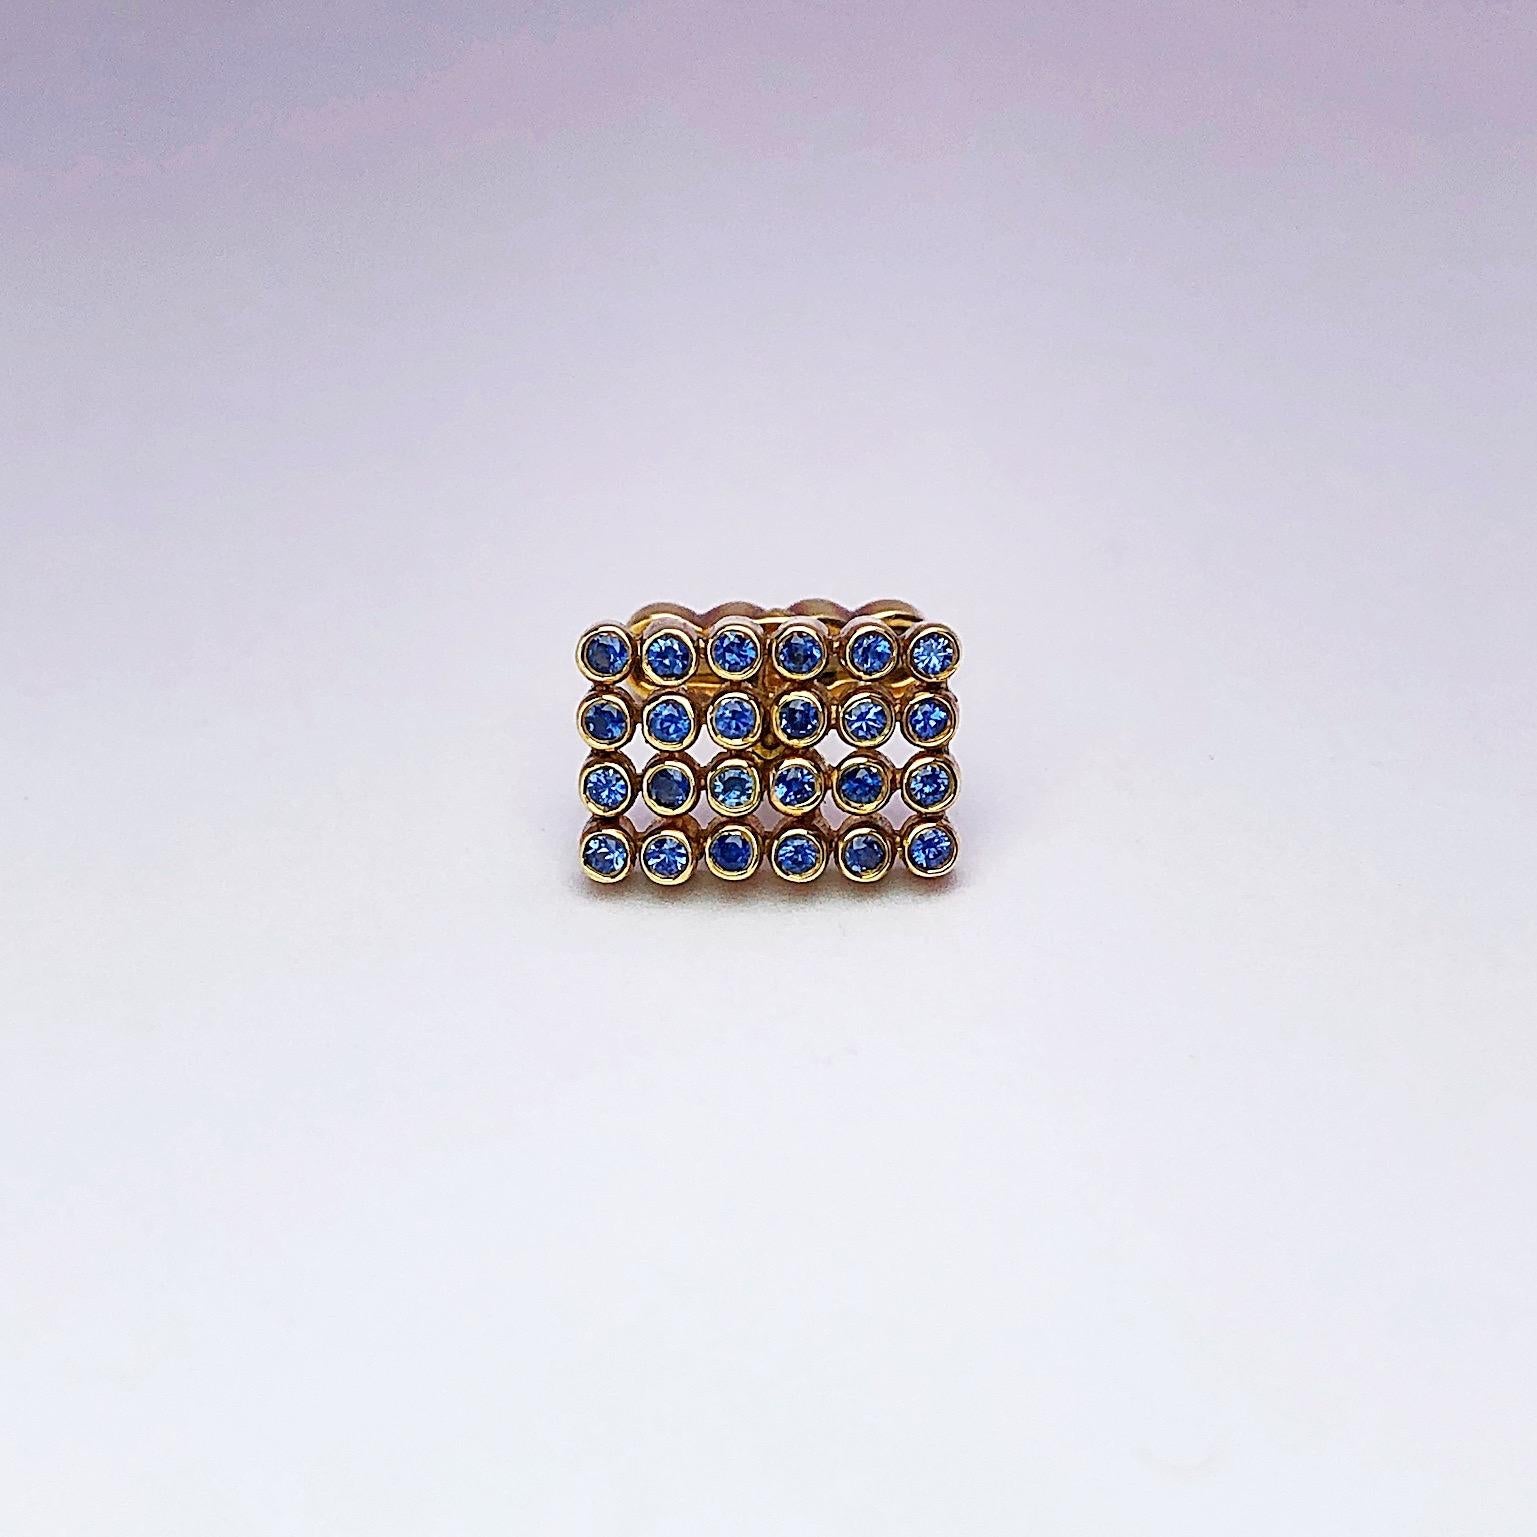 Created by George Gero ,renowned worldwide for luxurious men's cuff-links, comes this classic  rectangular shaped pair in 18 karat yellow gold with blue sapphires in tube settings. The collapsible backs are designed with four circles that mimic the